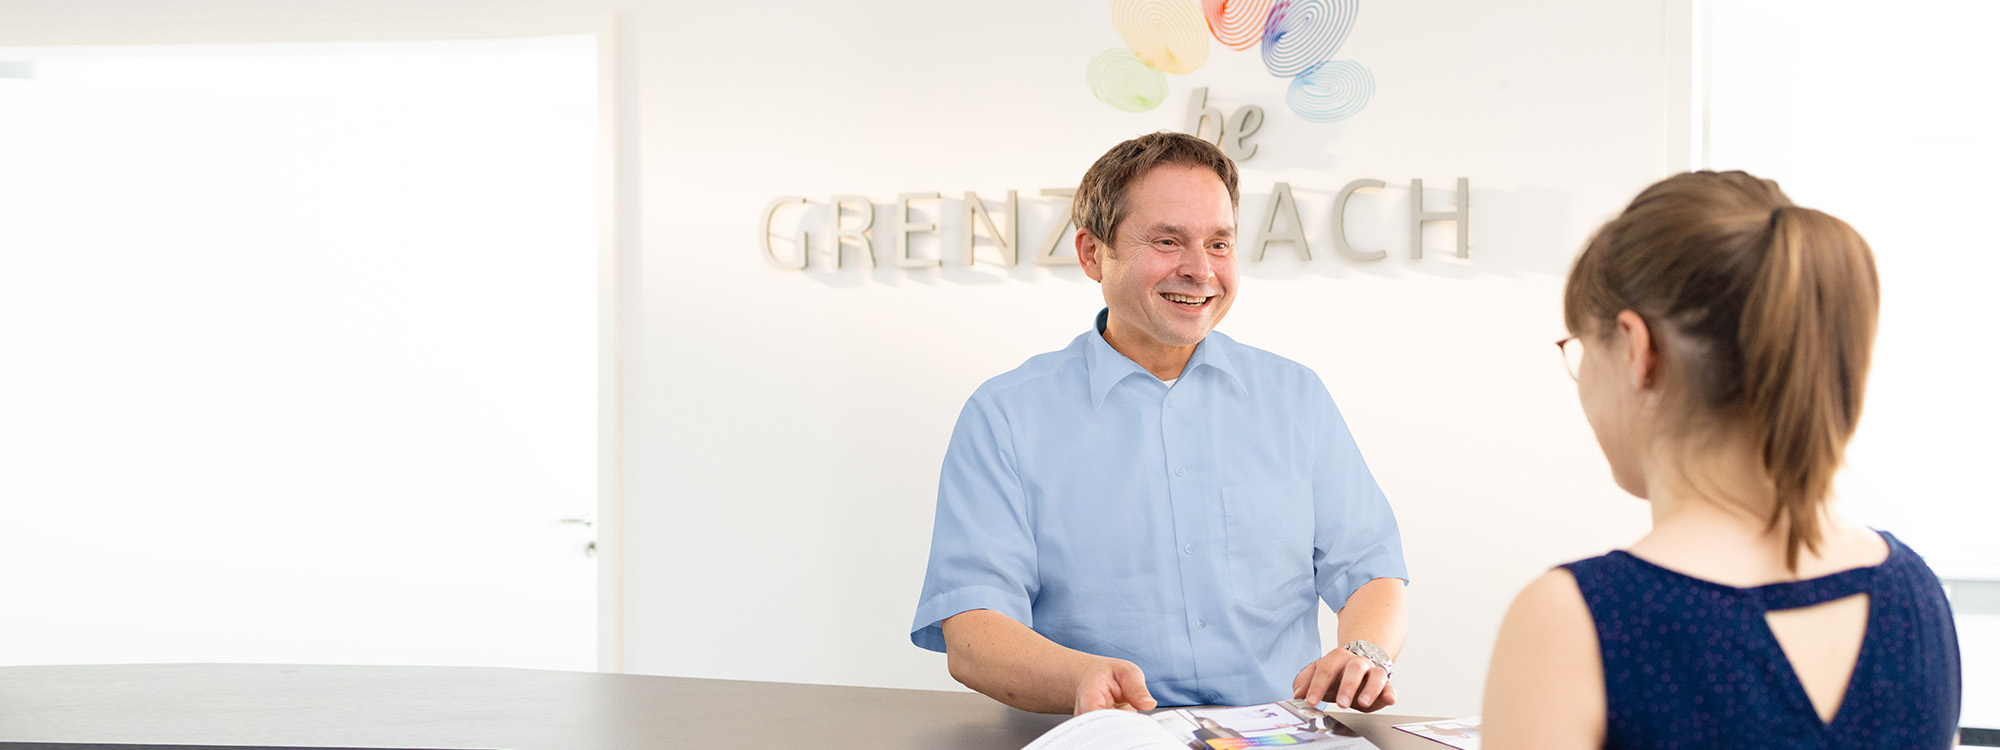 Grenzebach | We stand for a unique corporate culture.